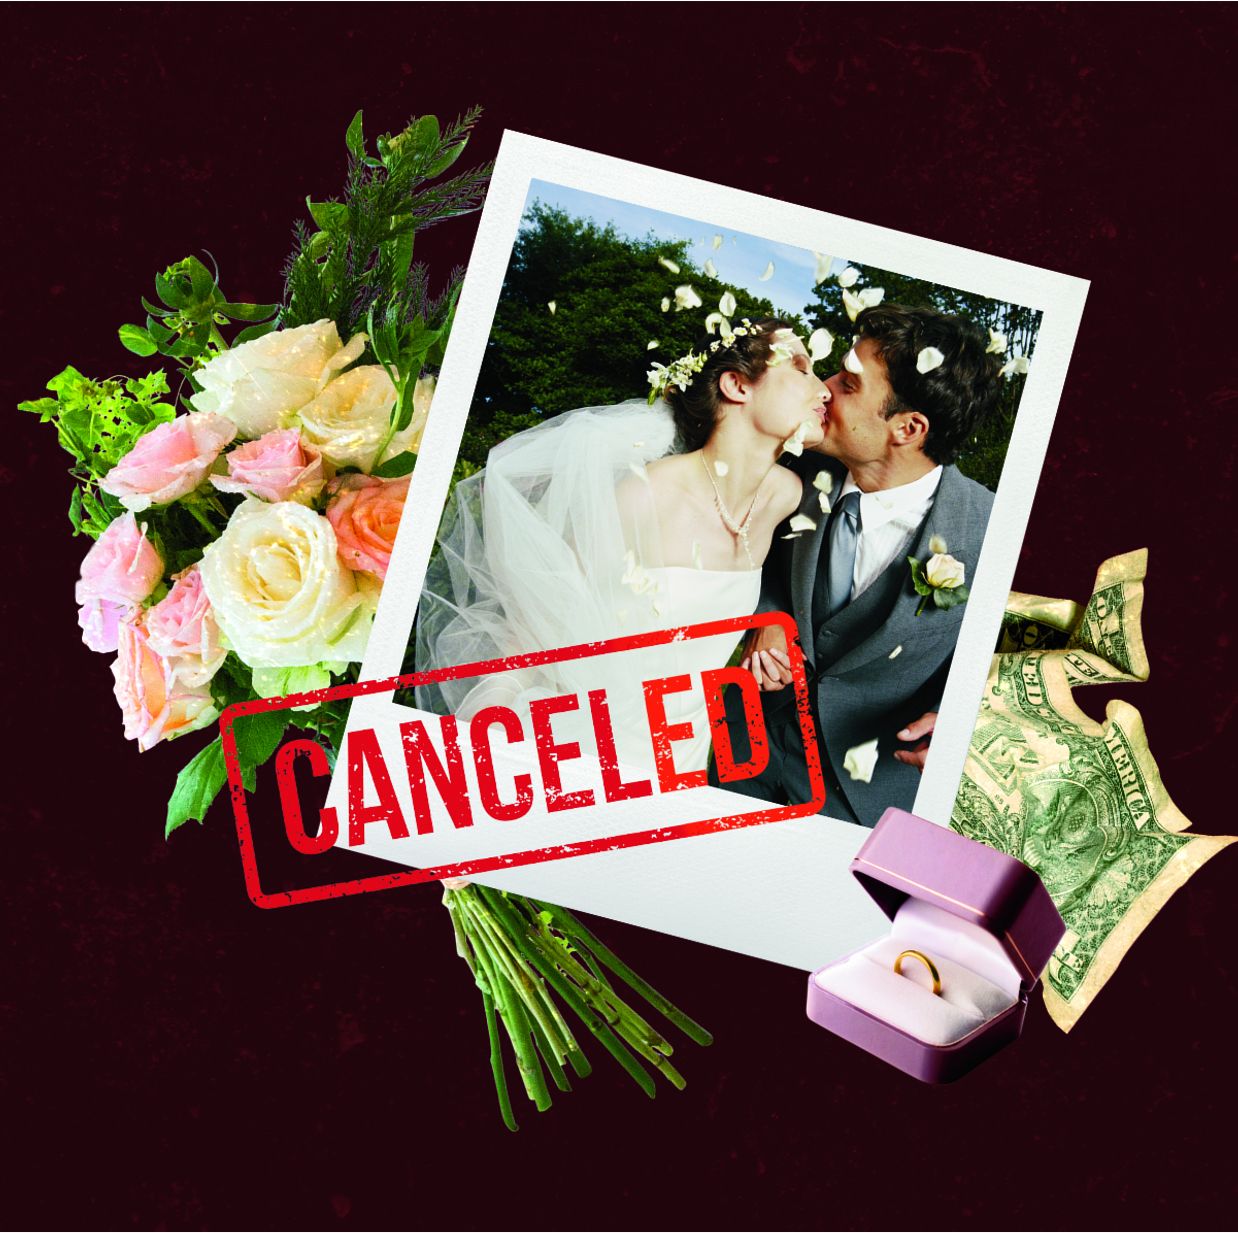 In Case You Want to Know What Happens After You Cancel Your Wedding, Here You Go